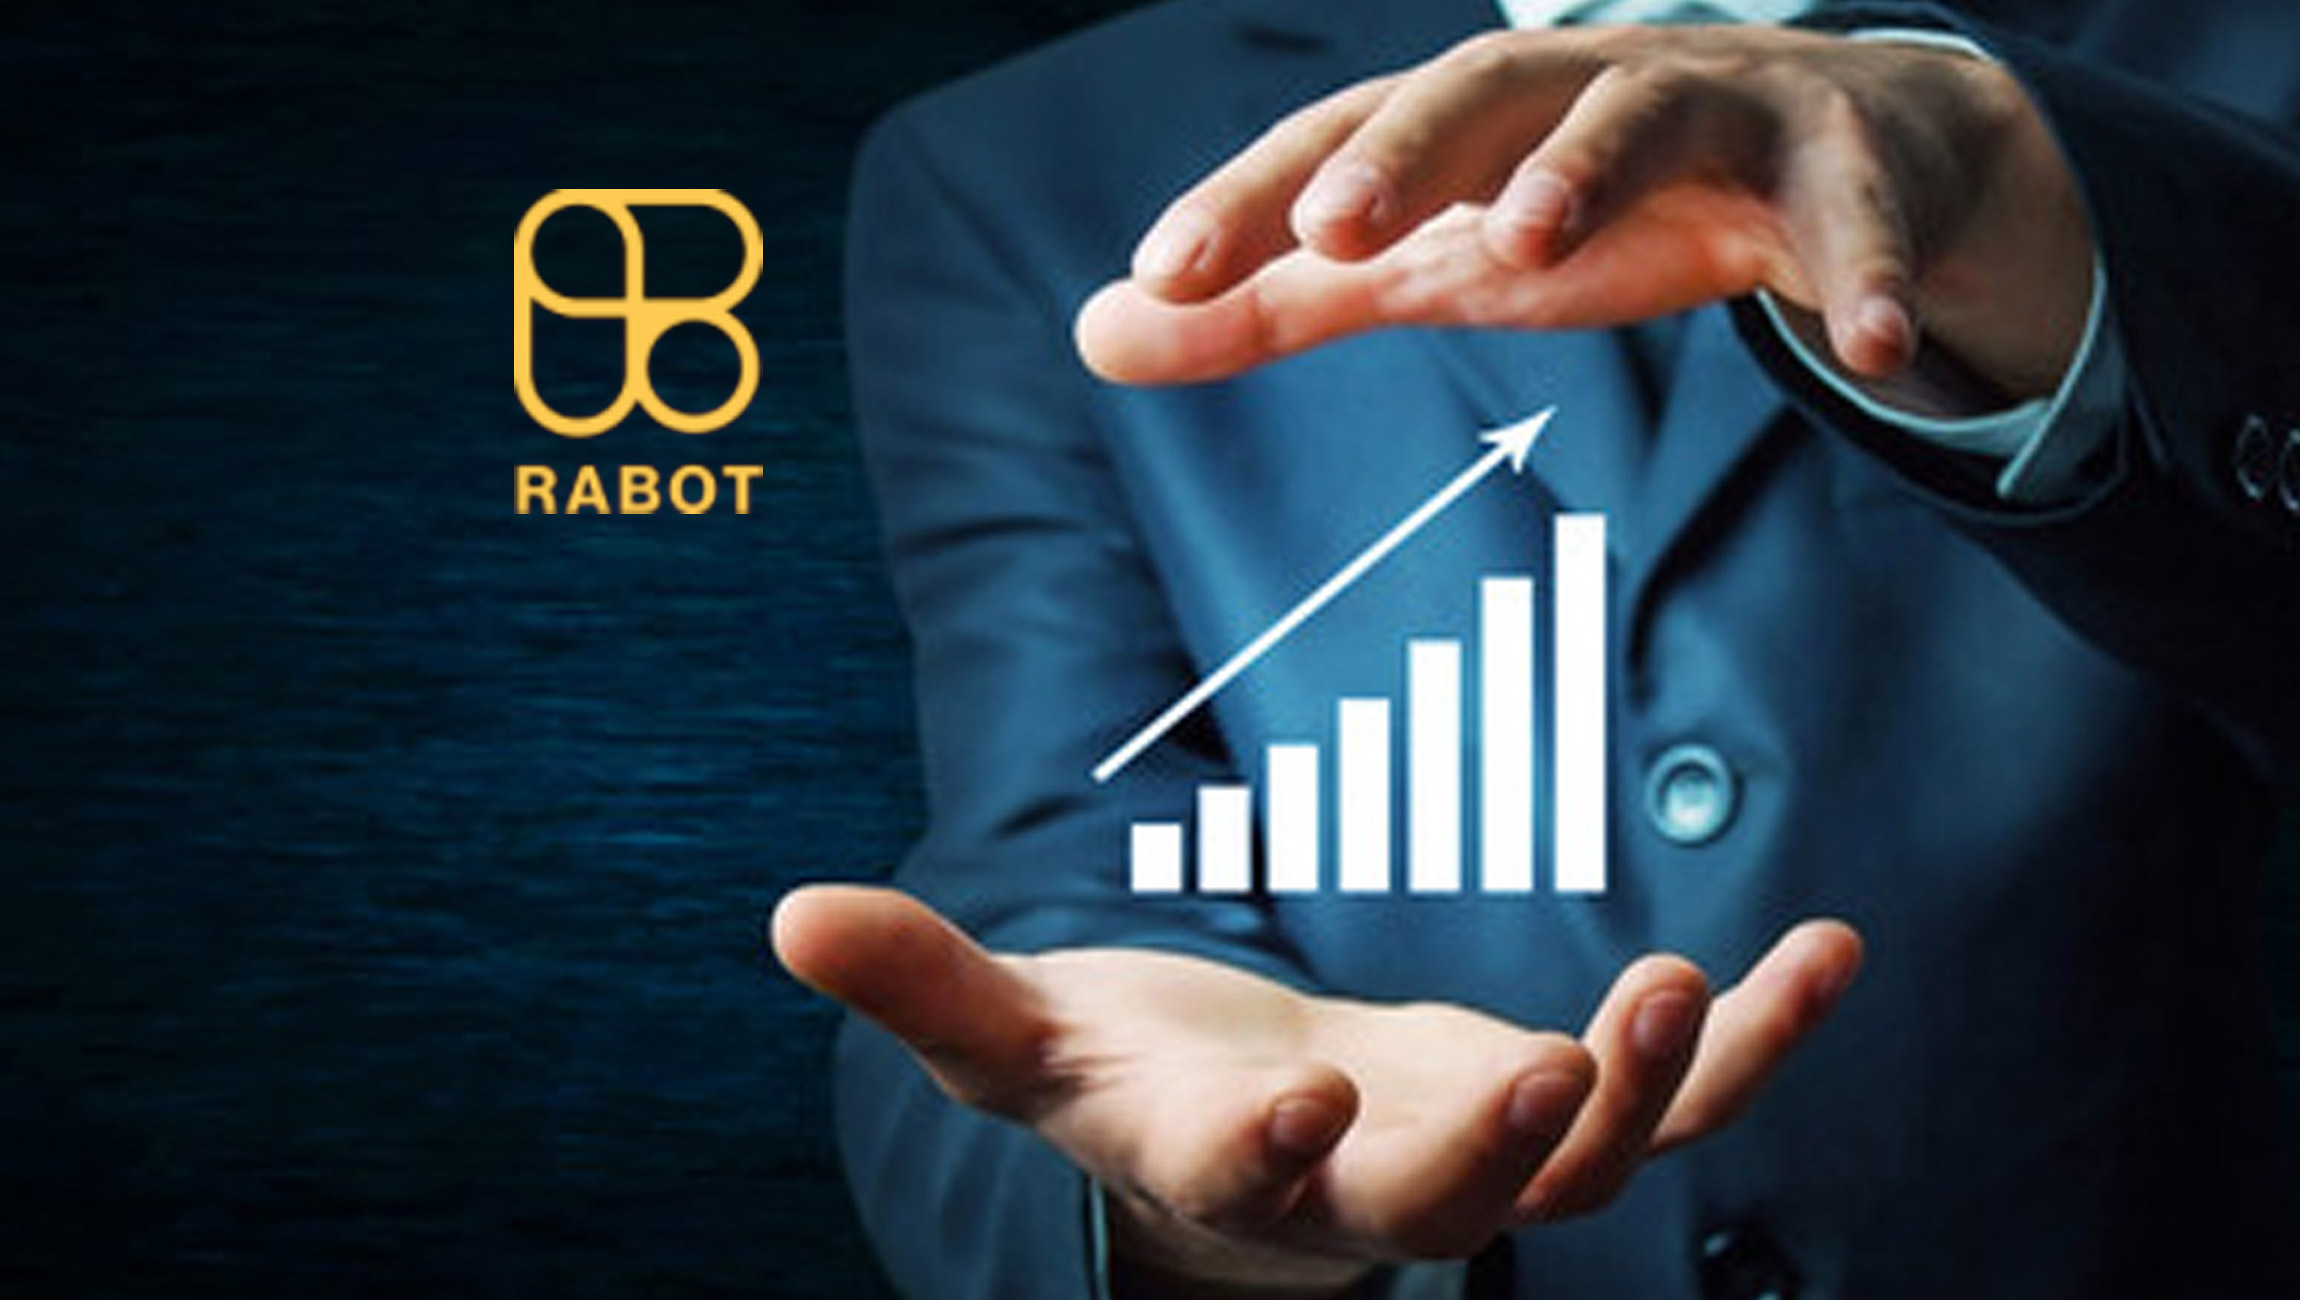 Rabot Raises $2M to Optimize E-commerce Warehouse Operations with Vision AI